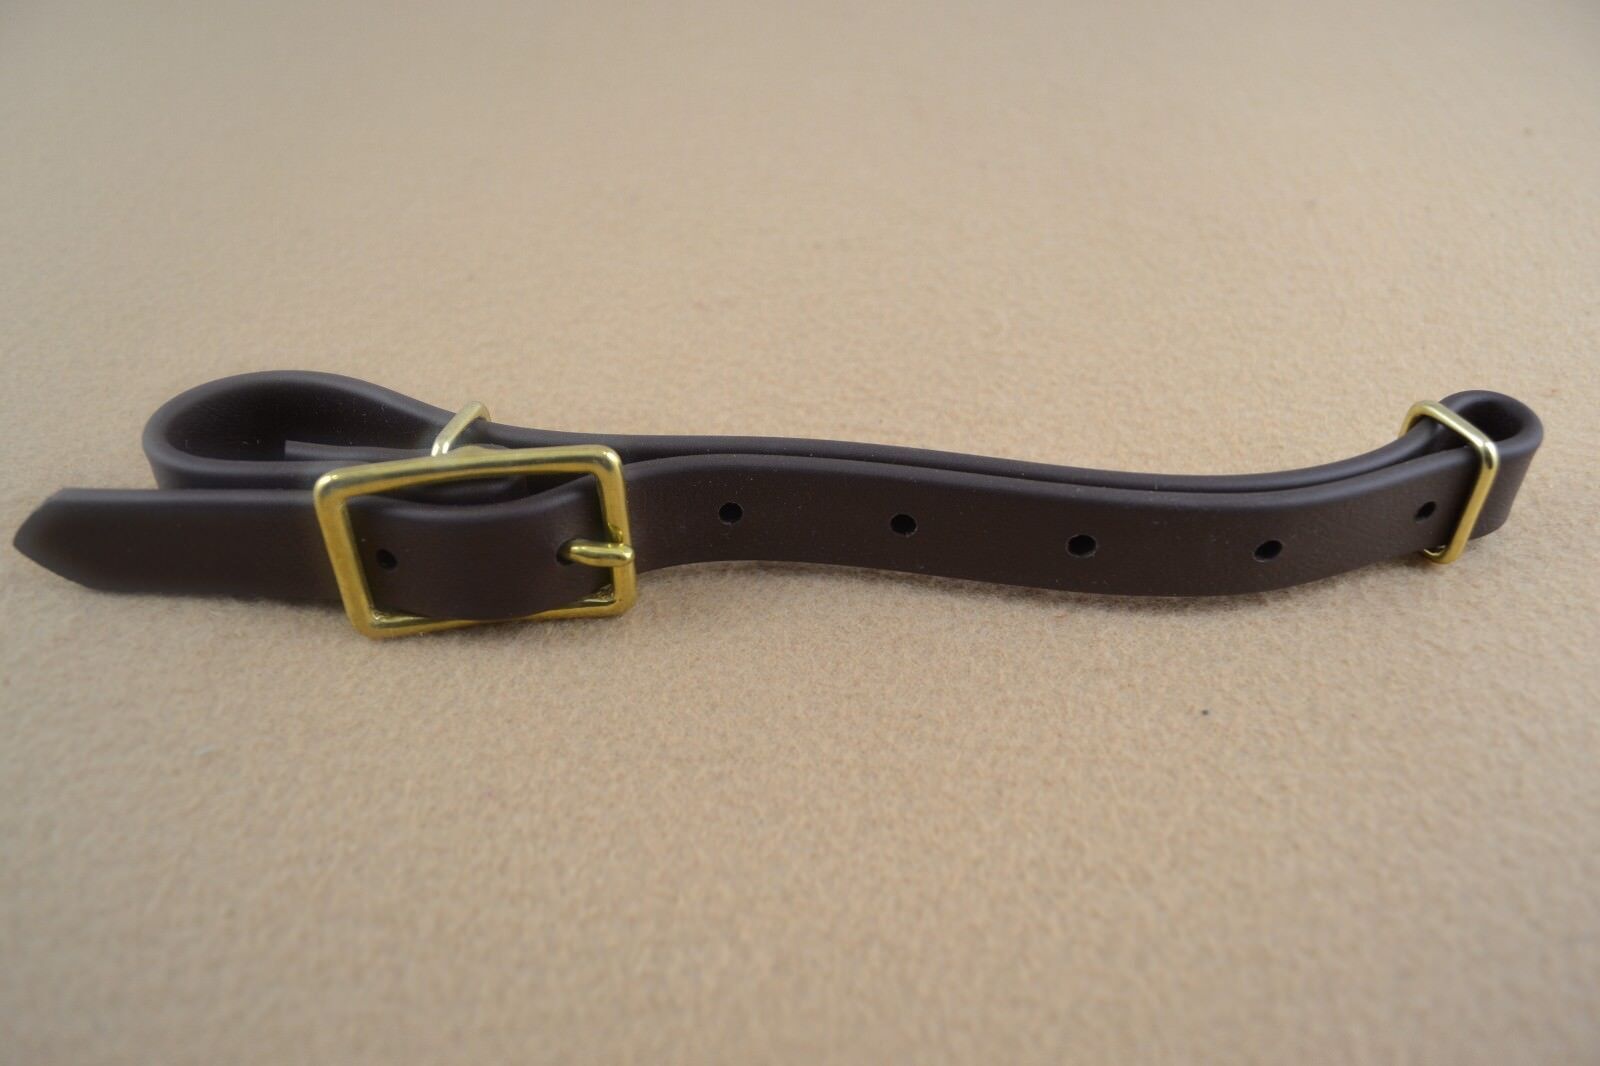 Flank - Connector Strap - 3/4" - Brown Biothane - Solid Brass Buckle (f308)